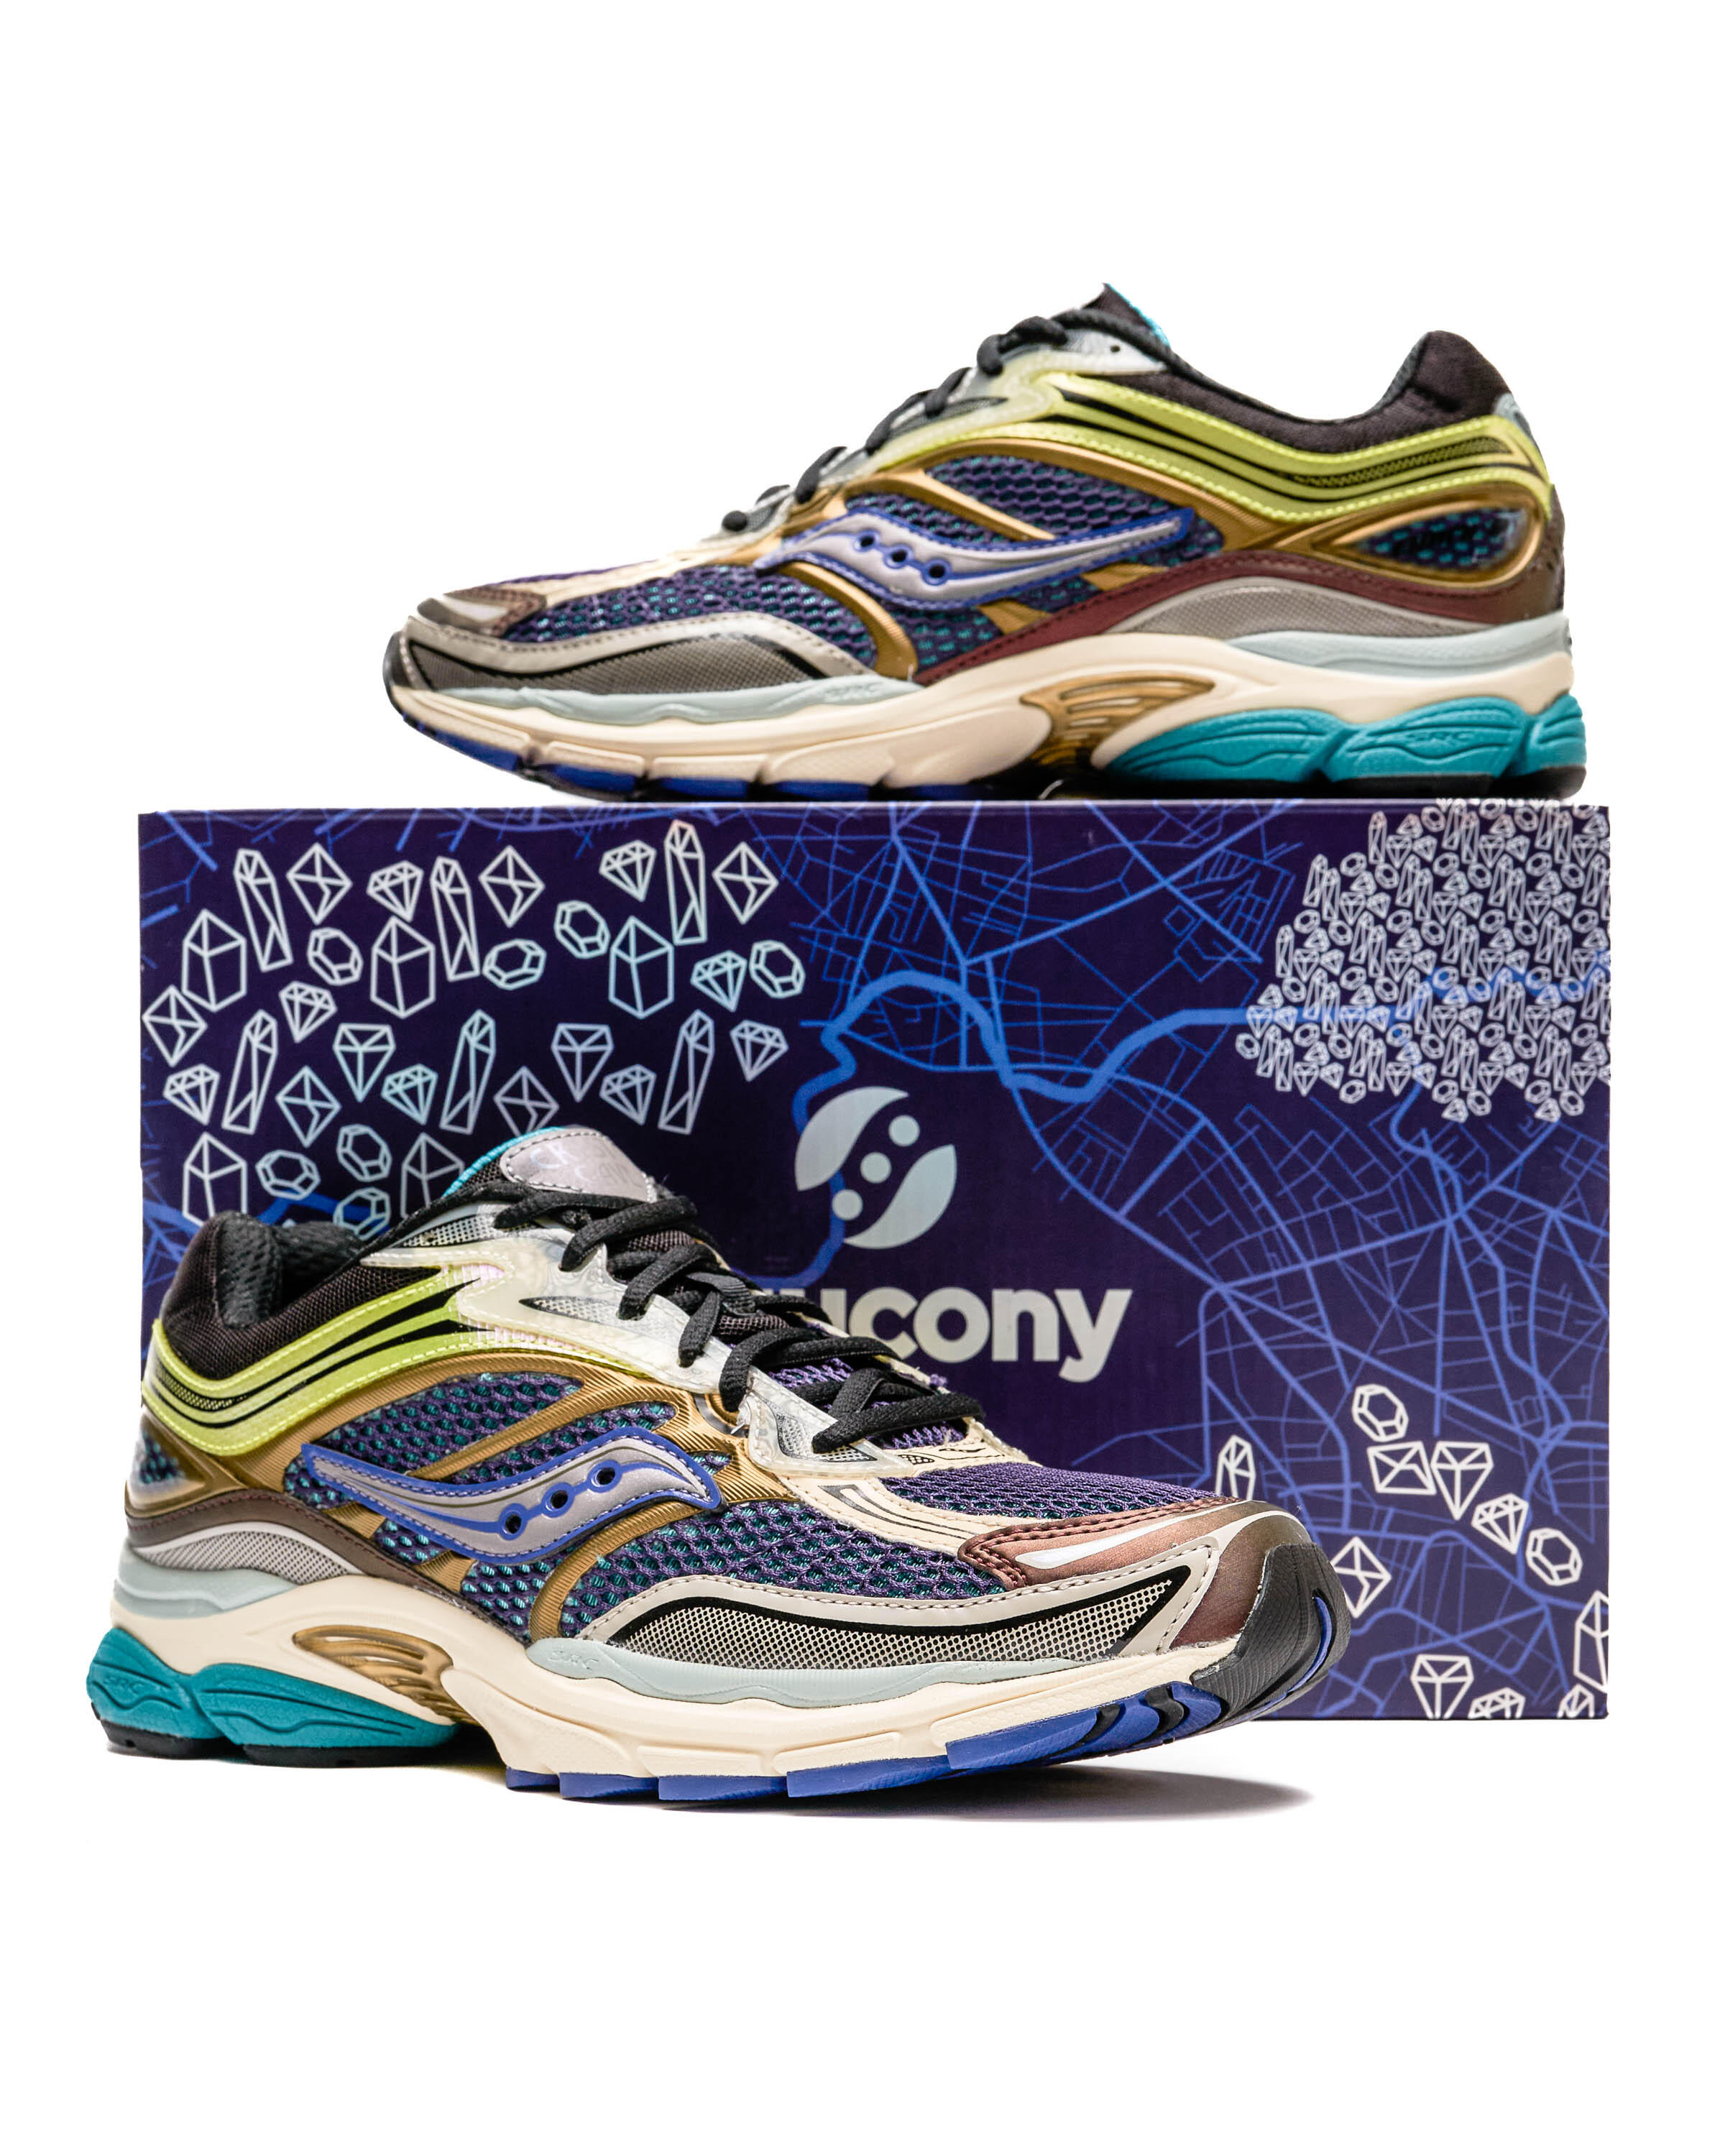 Saucony x Saucony Story Crystal Cave Pro Grid Omni 9